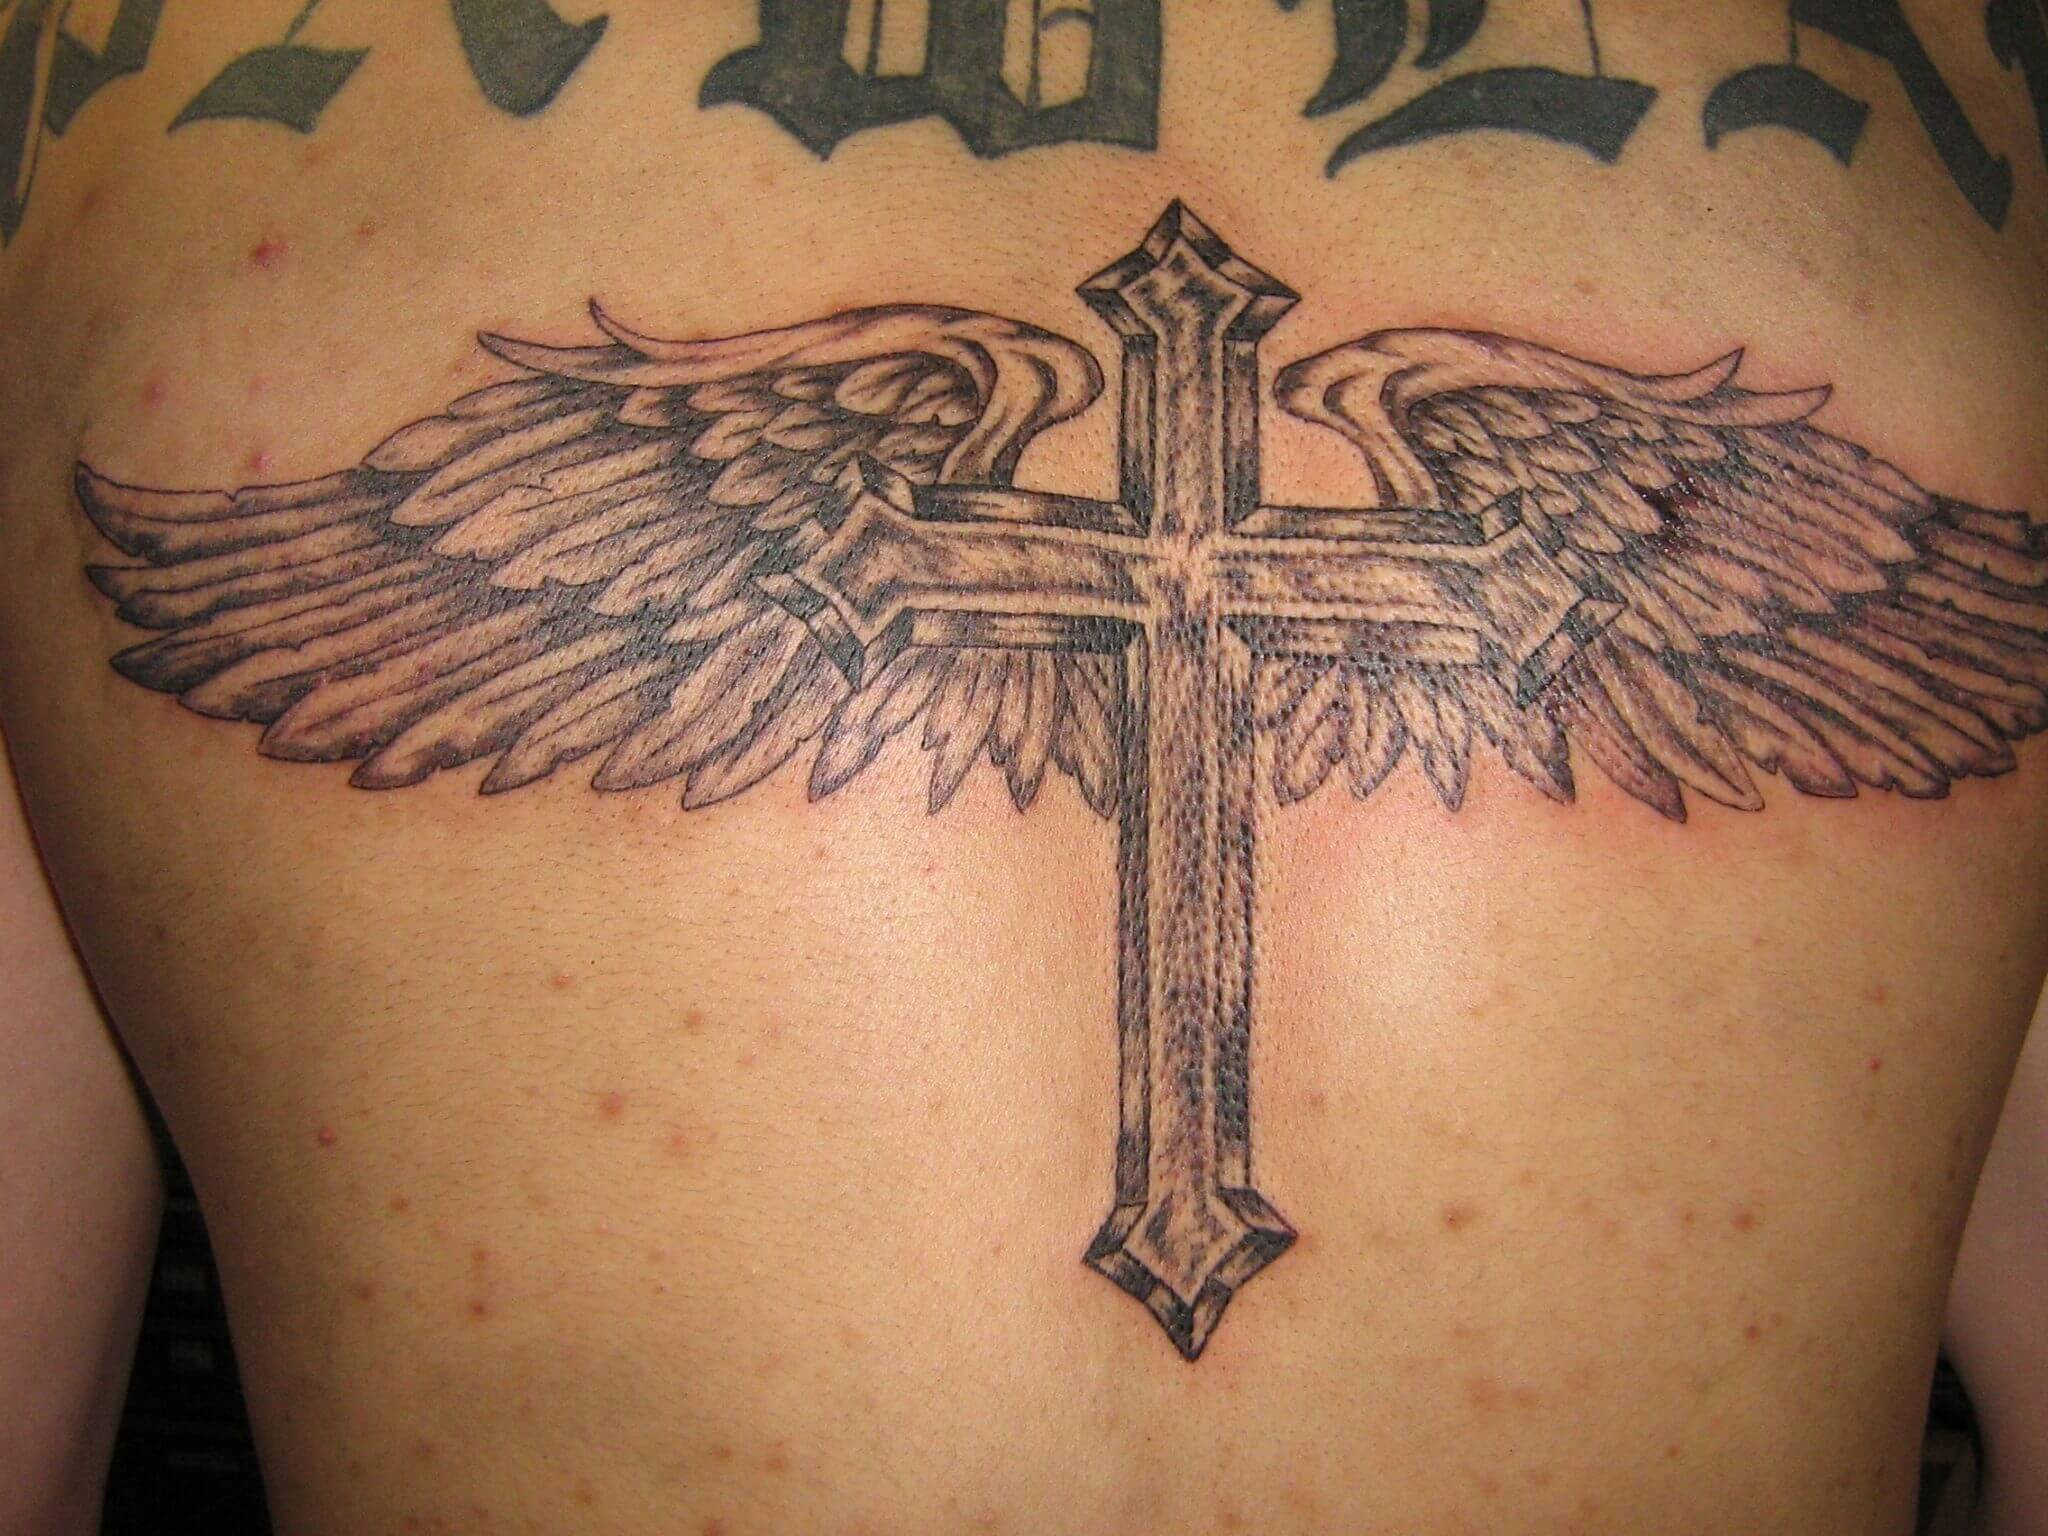 56 Best Cross Tattoos For Men Improb intended for sizing 2048 X 1536